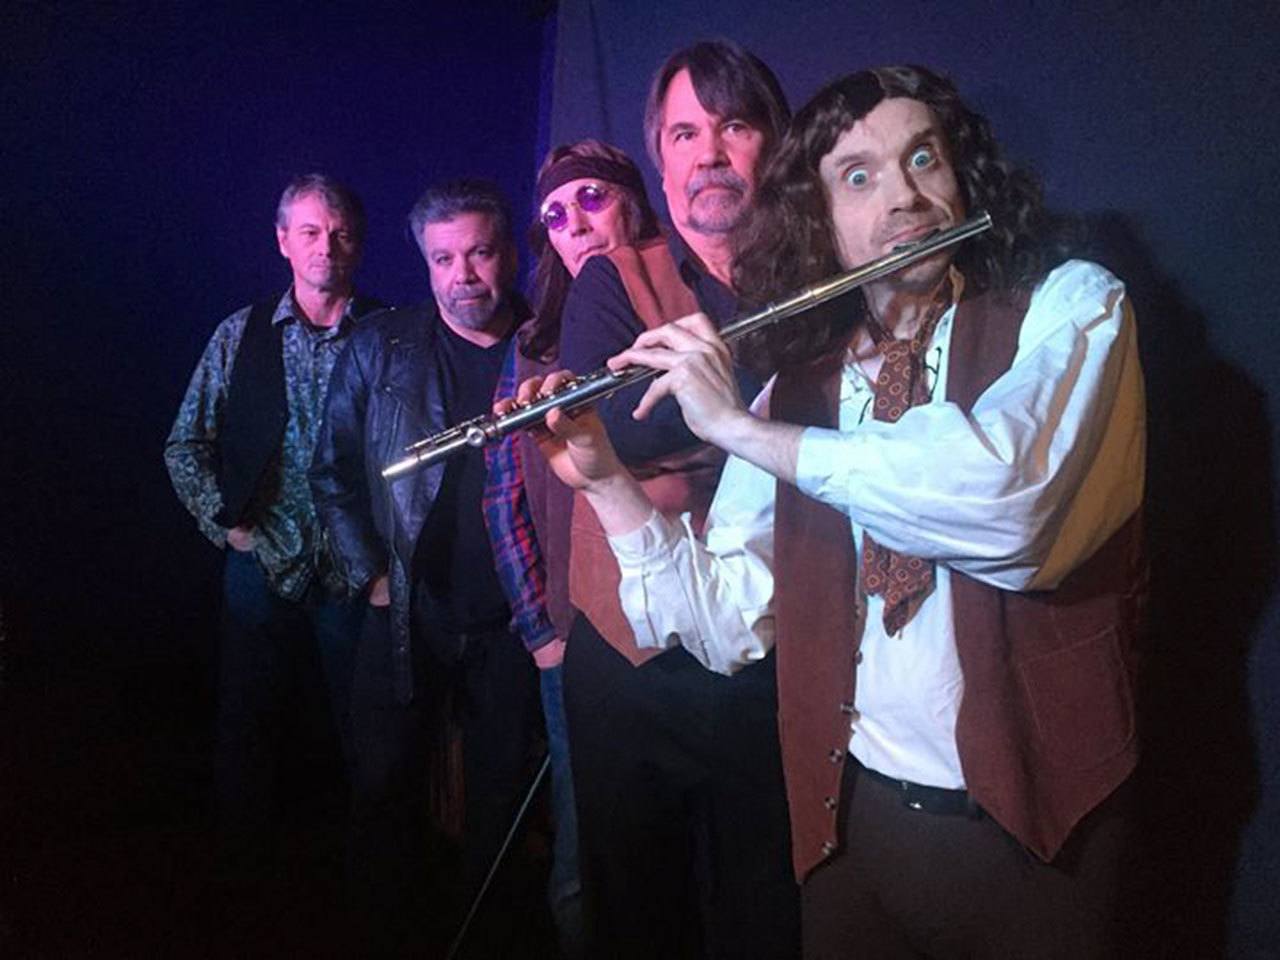 Backed by his band, Paul Forrest recreates the sights and sounds of Jethro Tull, bringing Ian Anderson to life to thoroughly entertaining his audience. COURTESY PHOTO